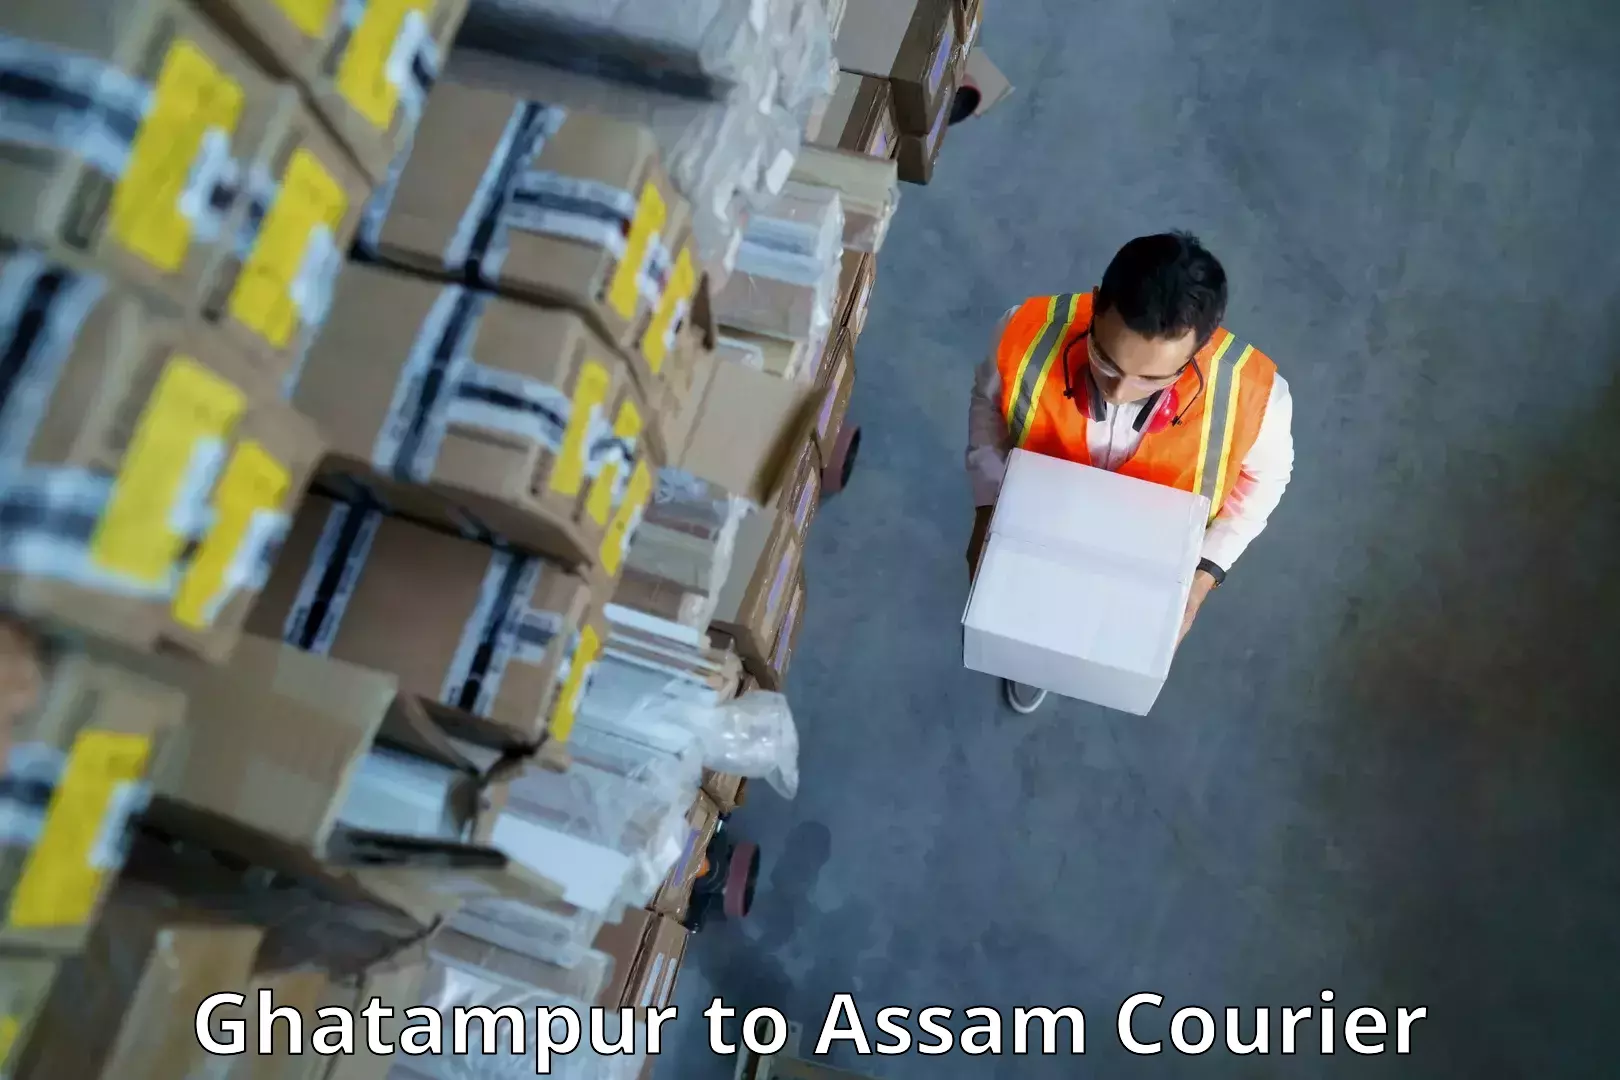 Courier service comparison in Ghatampur to Golakganj